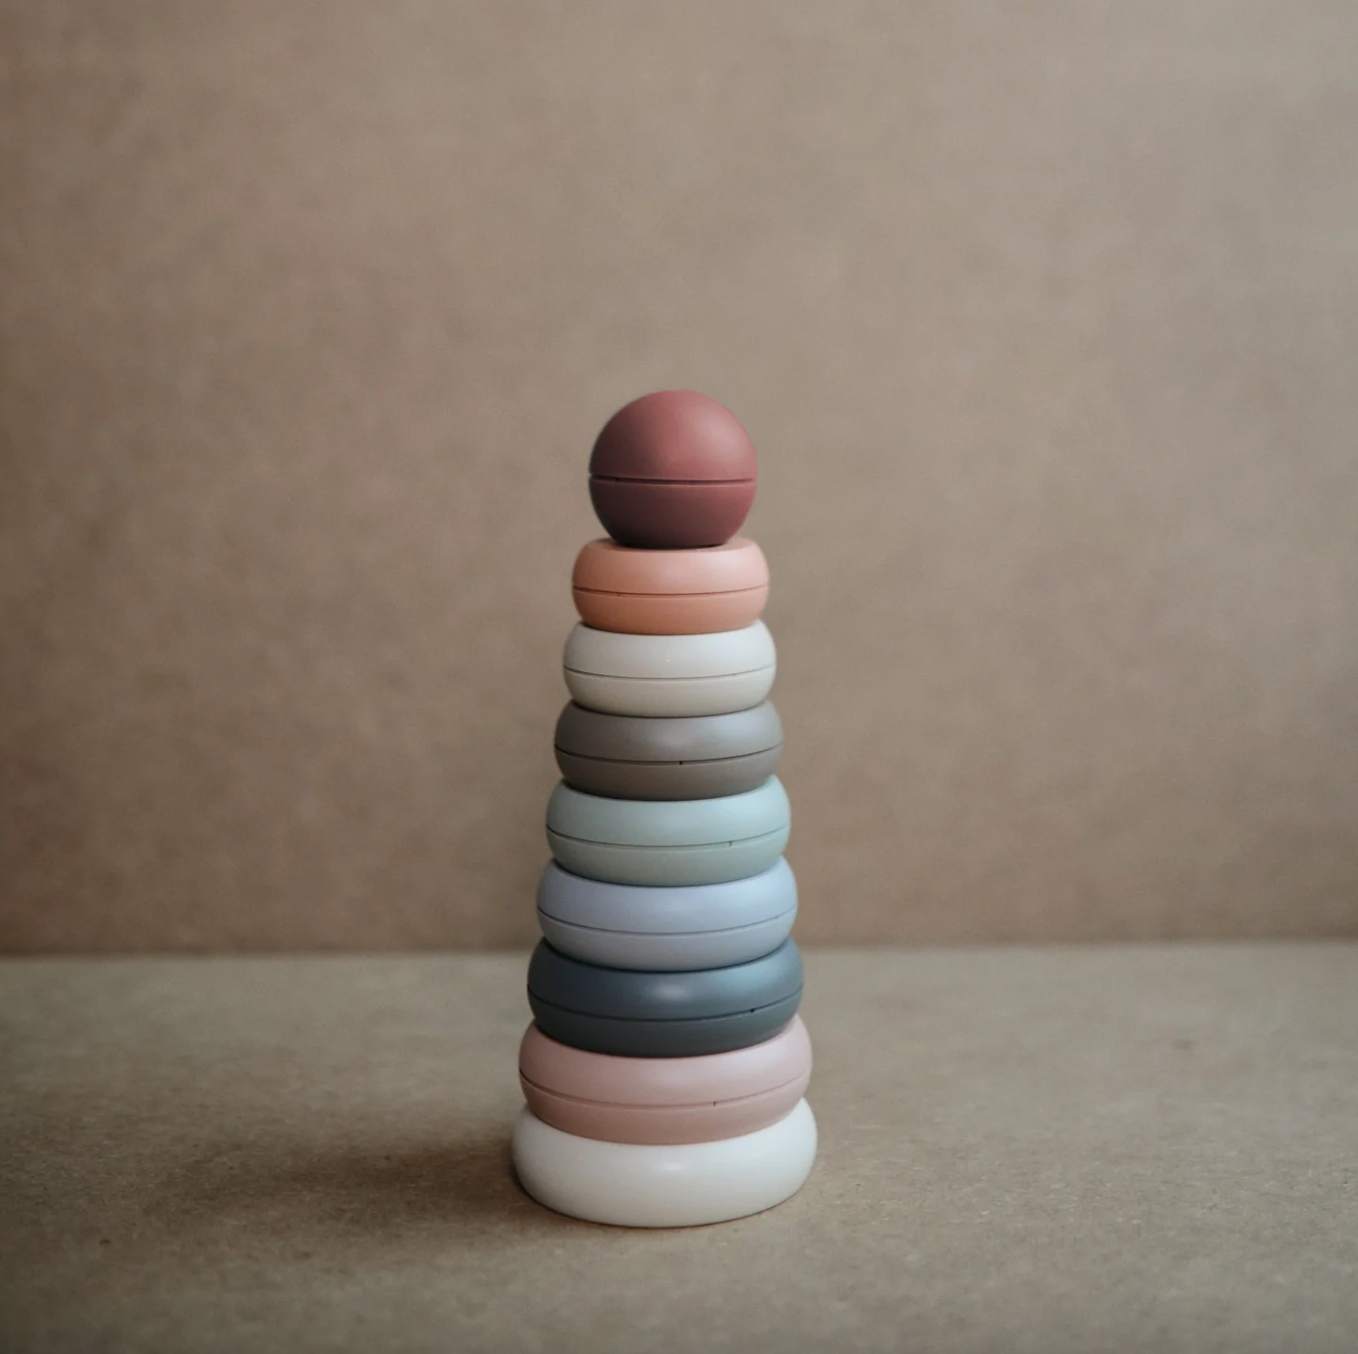 Load image into Gallery viewer, Stacking Rings Toy Original (mauve top)
